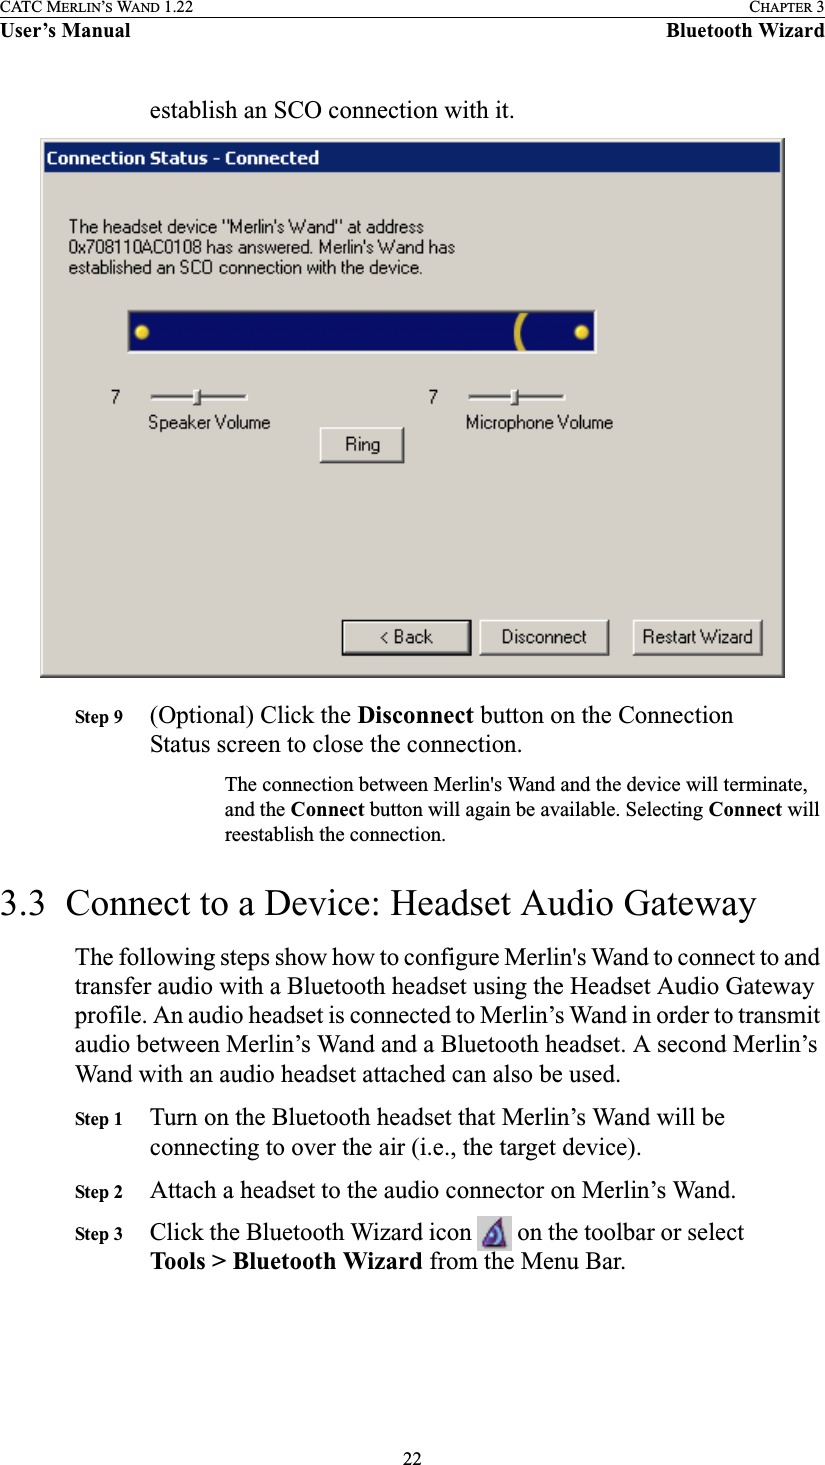 22CATC MERLIN’S WAND 1.22 CHAPTER 3User’s Manual Bluetooth Wizardestablish an SCO connection with it.Step 9 (Optional) Click the Disconnect button on the Connection Status screen to close the connection.The connection between Merlin&apos;s Wand and the device will terminate, and the Connect button will again be available. Selecting Connect will reestablish the connection.3.3  Connect to a Device: Headset Audio GatewayThe following steps show how to configure Merlin&apos;s Wand to connect to and transfer audio with a Bluetooth headset using the Headset Audio Gateway profile. An audio headset is connected to Merlin’s Wand in order to transmit audio between Merlin’s Wand and a Bluetooth headset. A second Merlin’s Wand with an audio headset attached can also be used.Step 1 Turn on the Bluetooth headset that Merlin’s Wand will be connecting to over the air (i.e., the target device).Step 2 Attach a headset to the audio connector on Merlin’s Wand.Step 3 Click the Bluetooth Wizard icon   on the toolbar or select Tools &gt; Bluetooth Wizard from the Menu Bar.